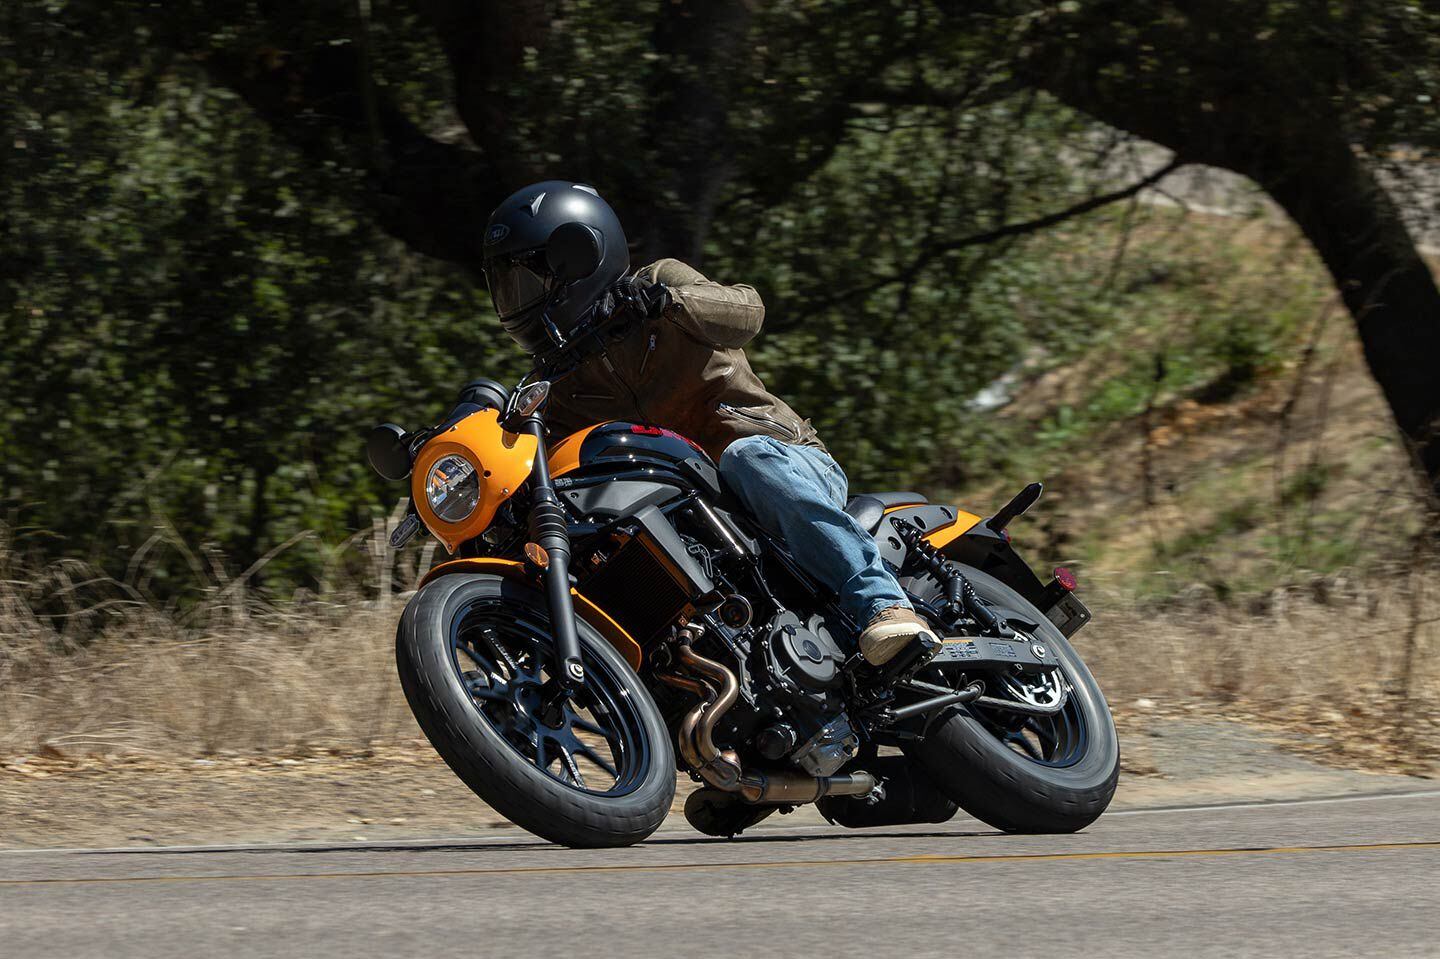 As sporty as the Eliminator is on canyon roads, its low ground clearance can hold it back if ridden too aggressively.